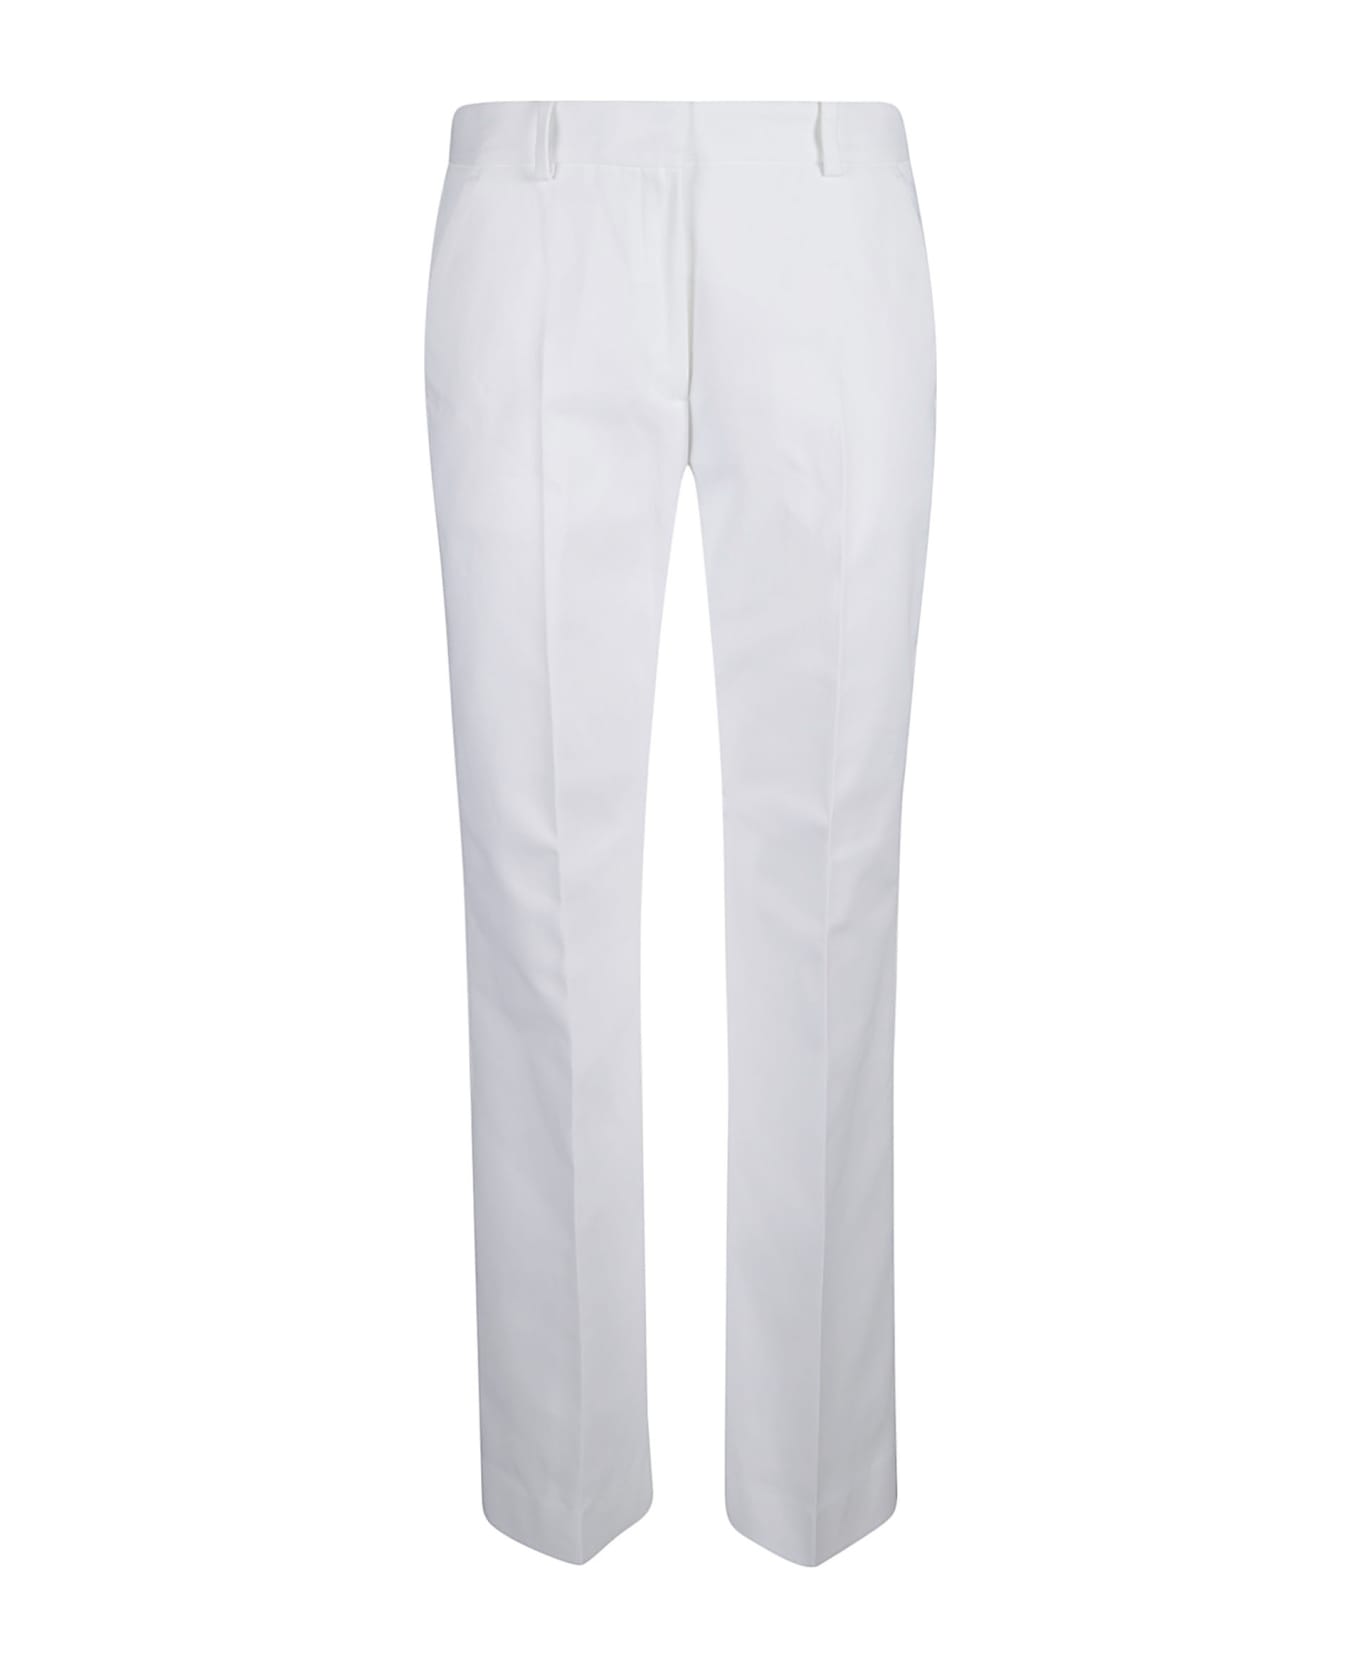 Calvin Klein Cotton Twill Relax Bootcut Trousers - Yaf Bright White ボトムス